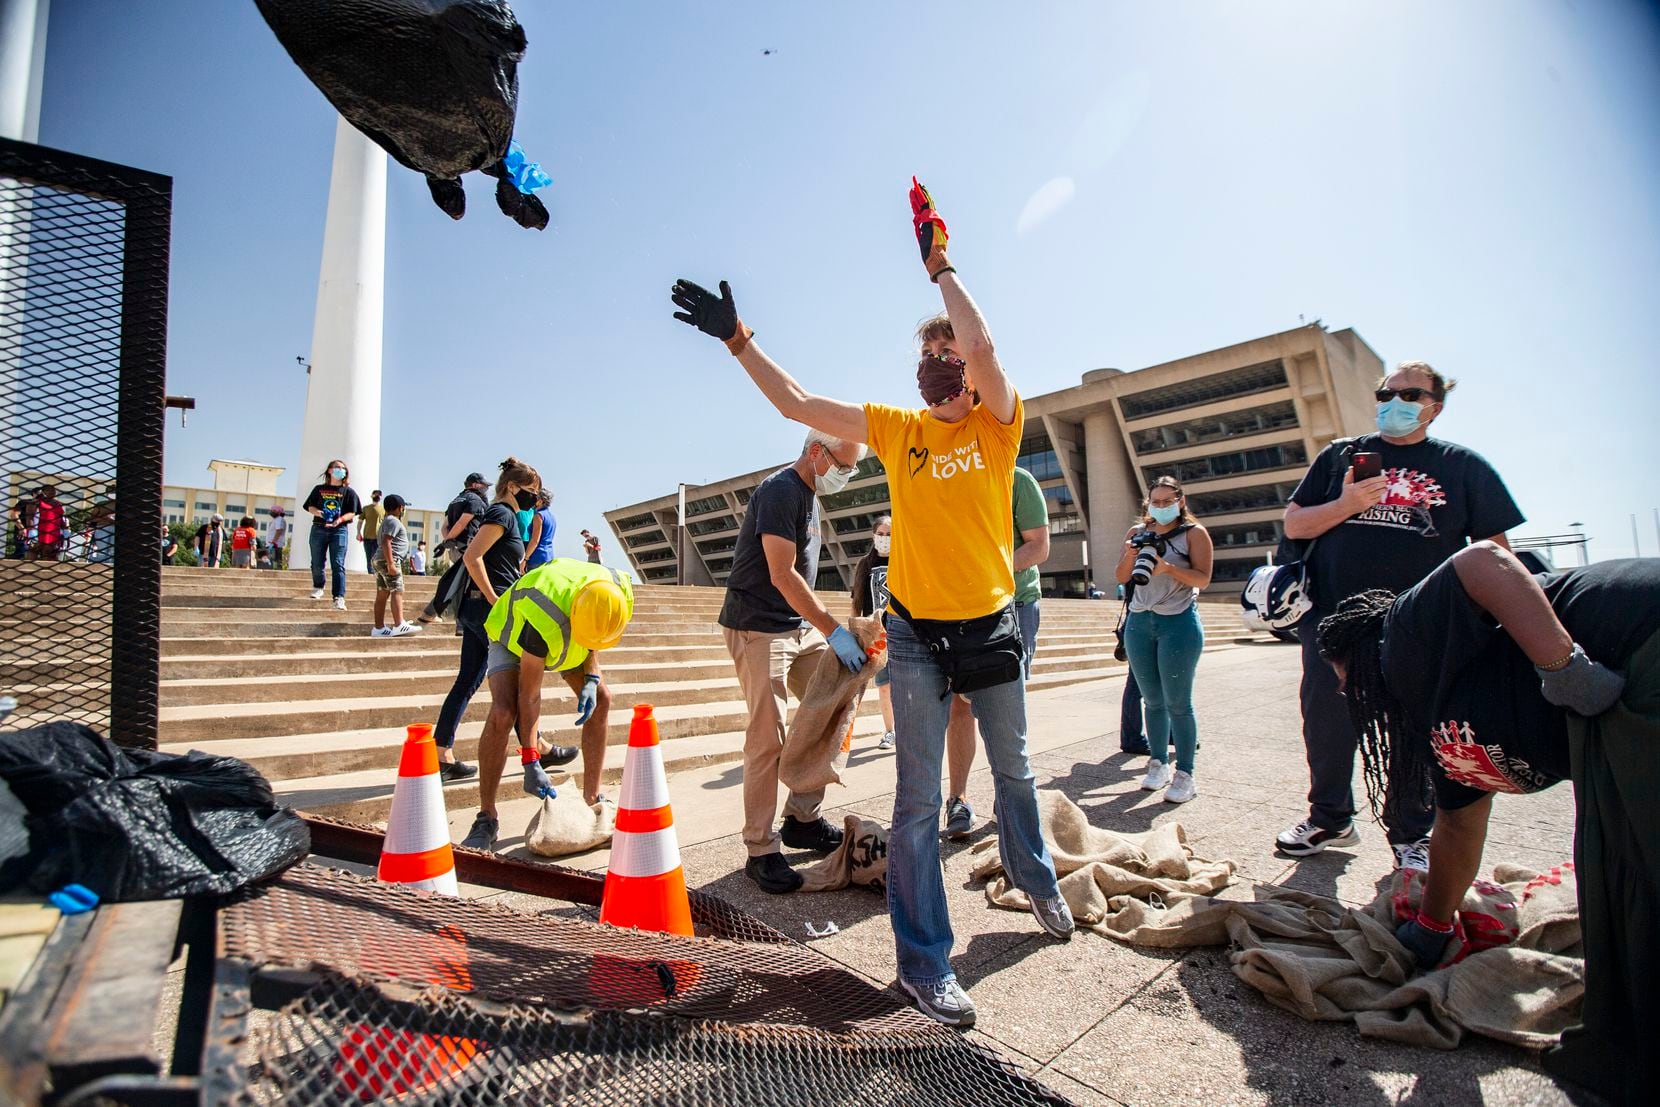 Melinda Enochs-Baucom tosses a bag of shingles into the back of a City of Dallas trailer at Dallas City Hall, Monday, October 12, 2020. Enochs-Baucom and about 30 other demonstrators rallied on the city hall plaza to demand that the city finally begin to clean up “Shingle Mountain” in southeast Dallas. (Brandon Wade/Special Contributor)